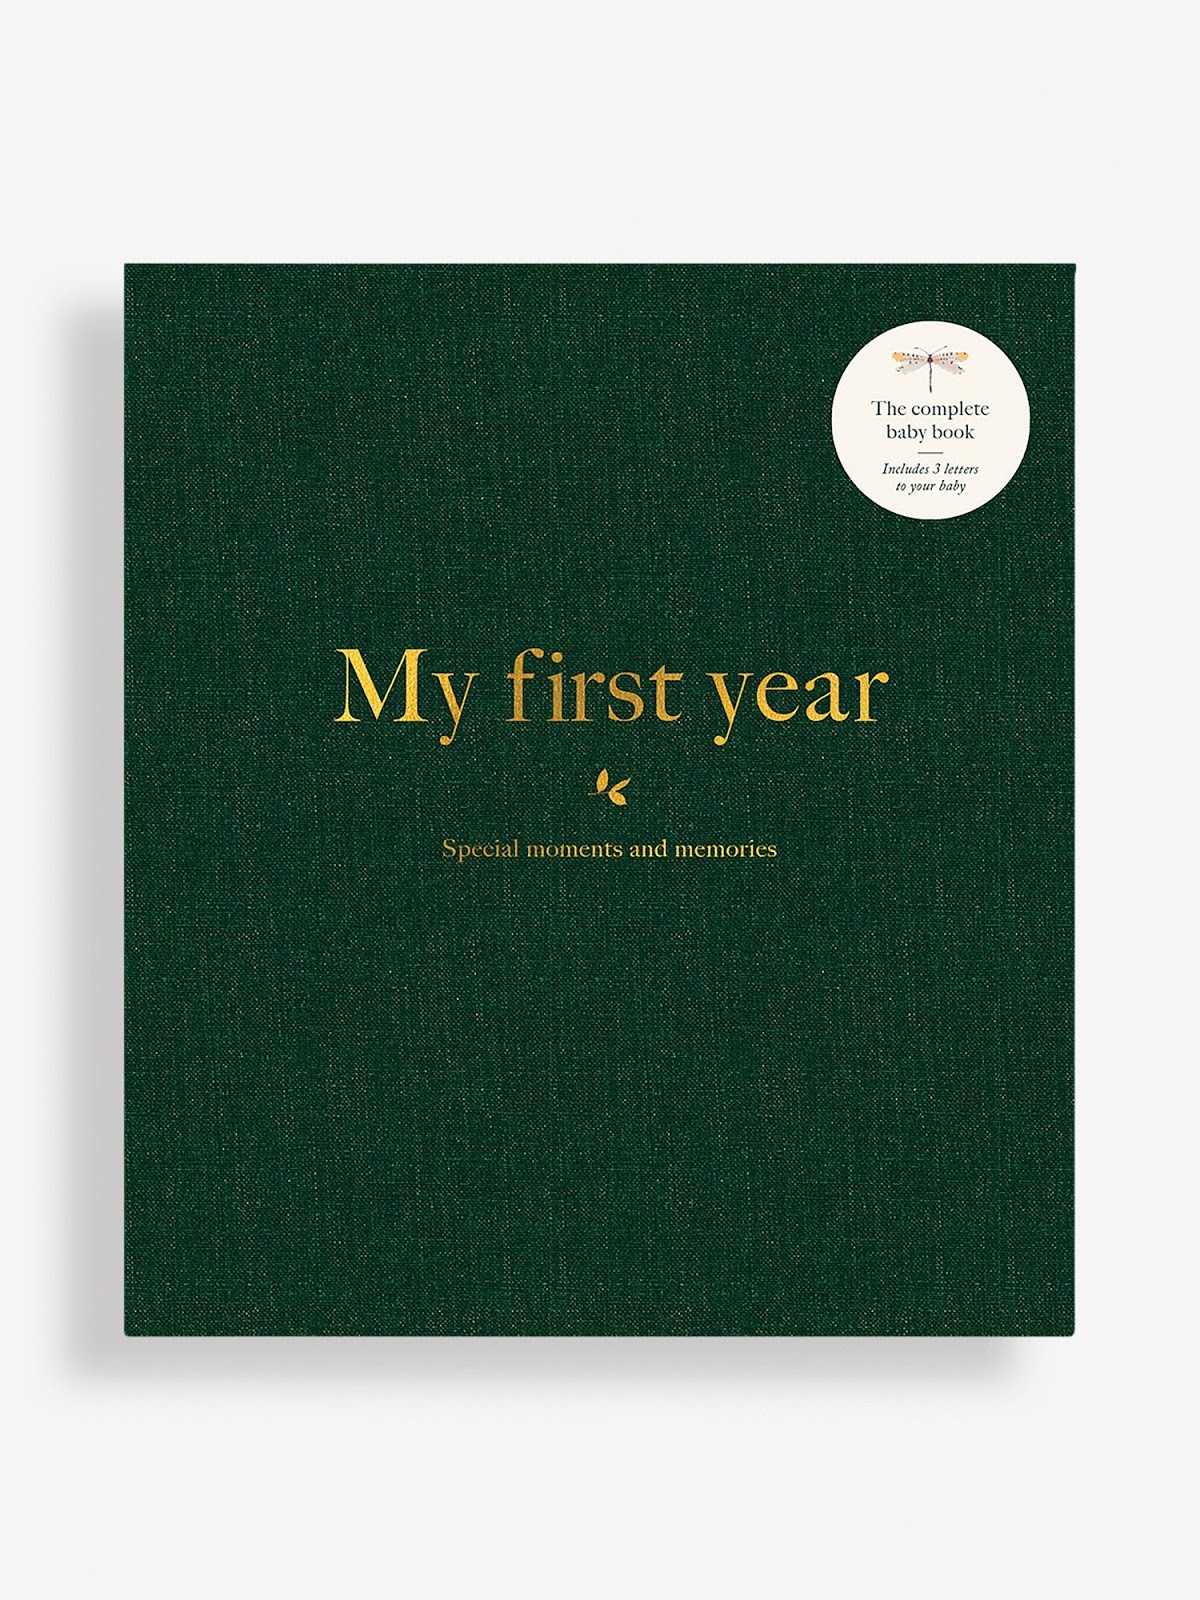 Treasure special memories with a my first year book